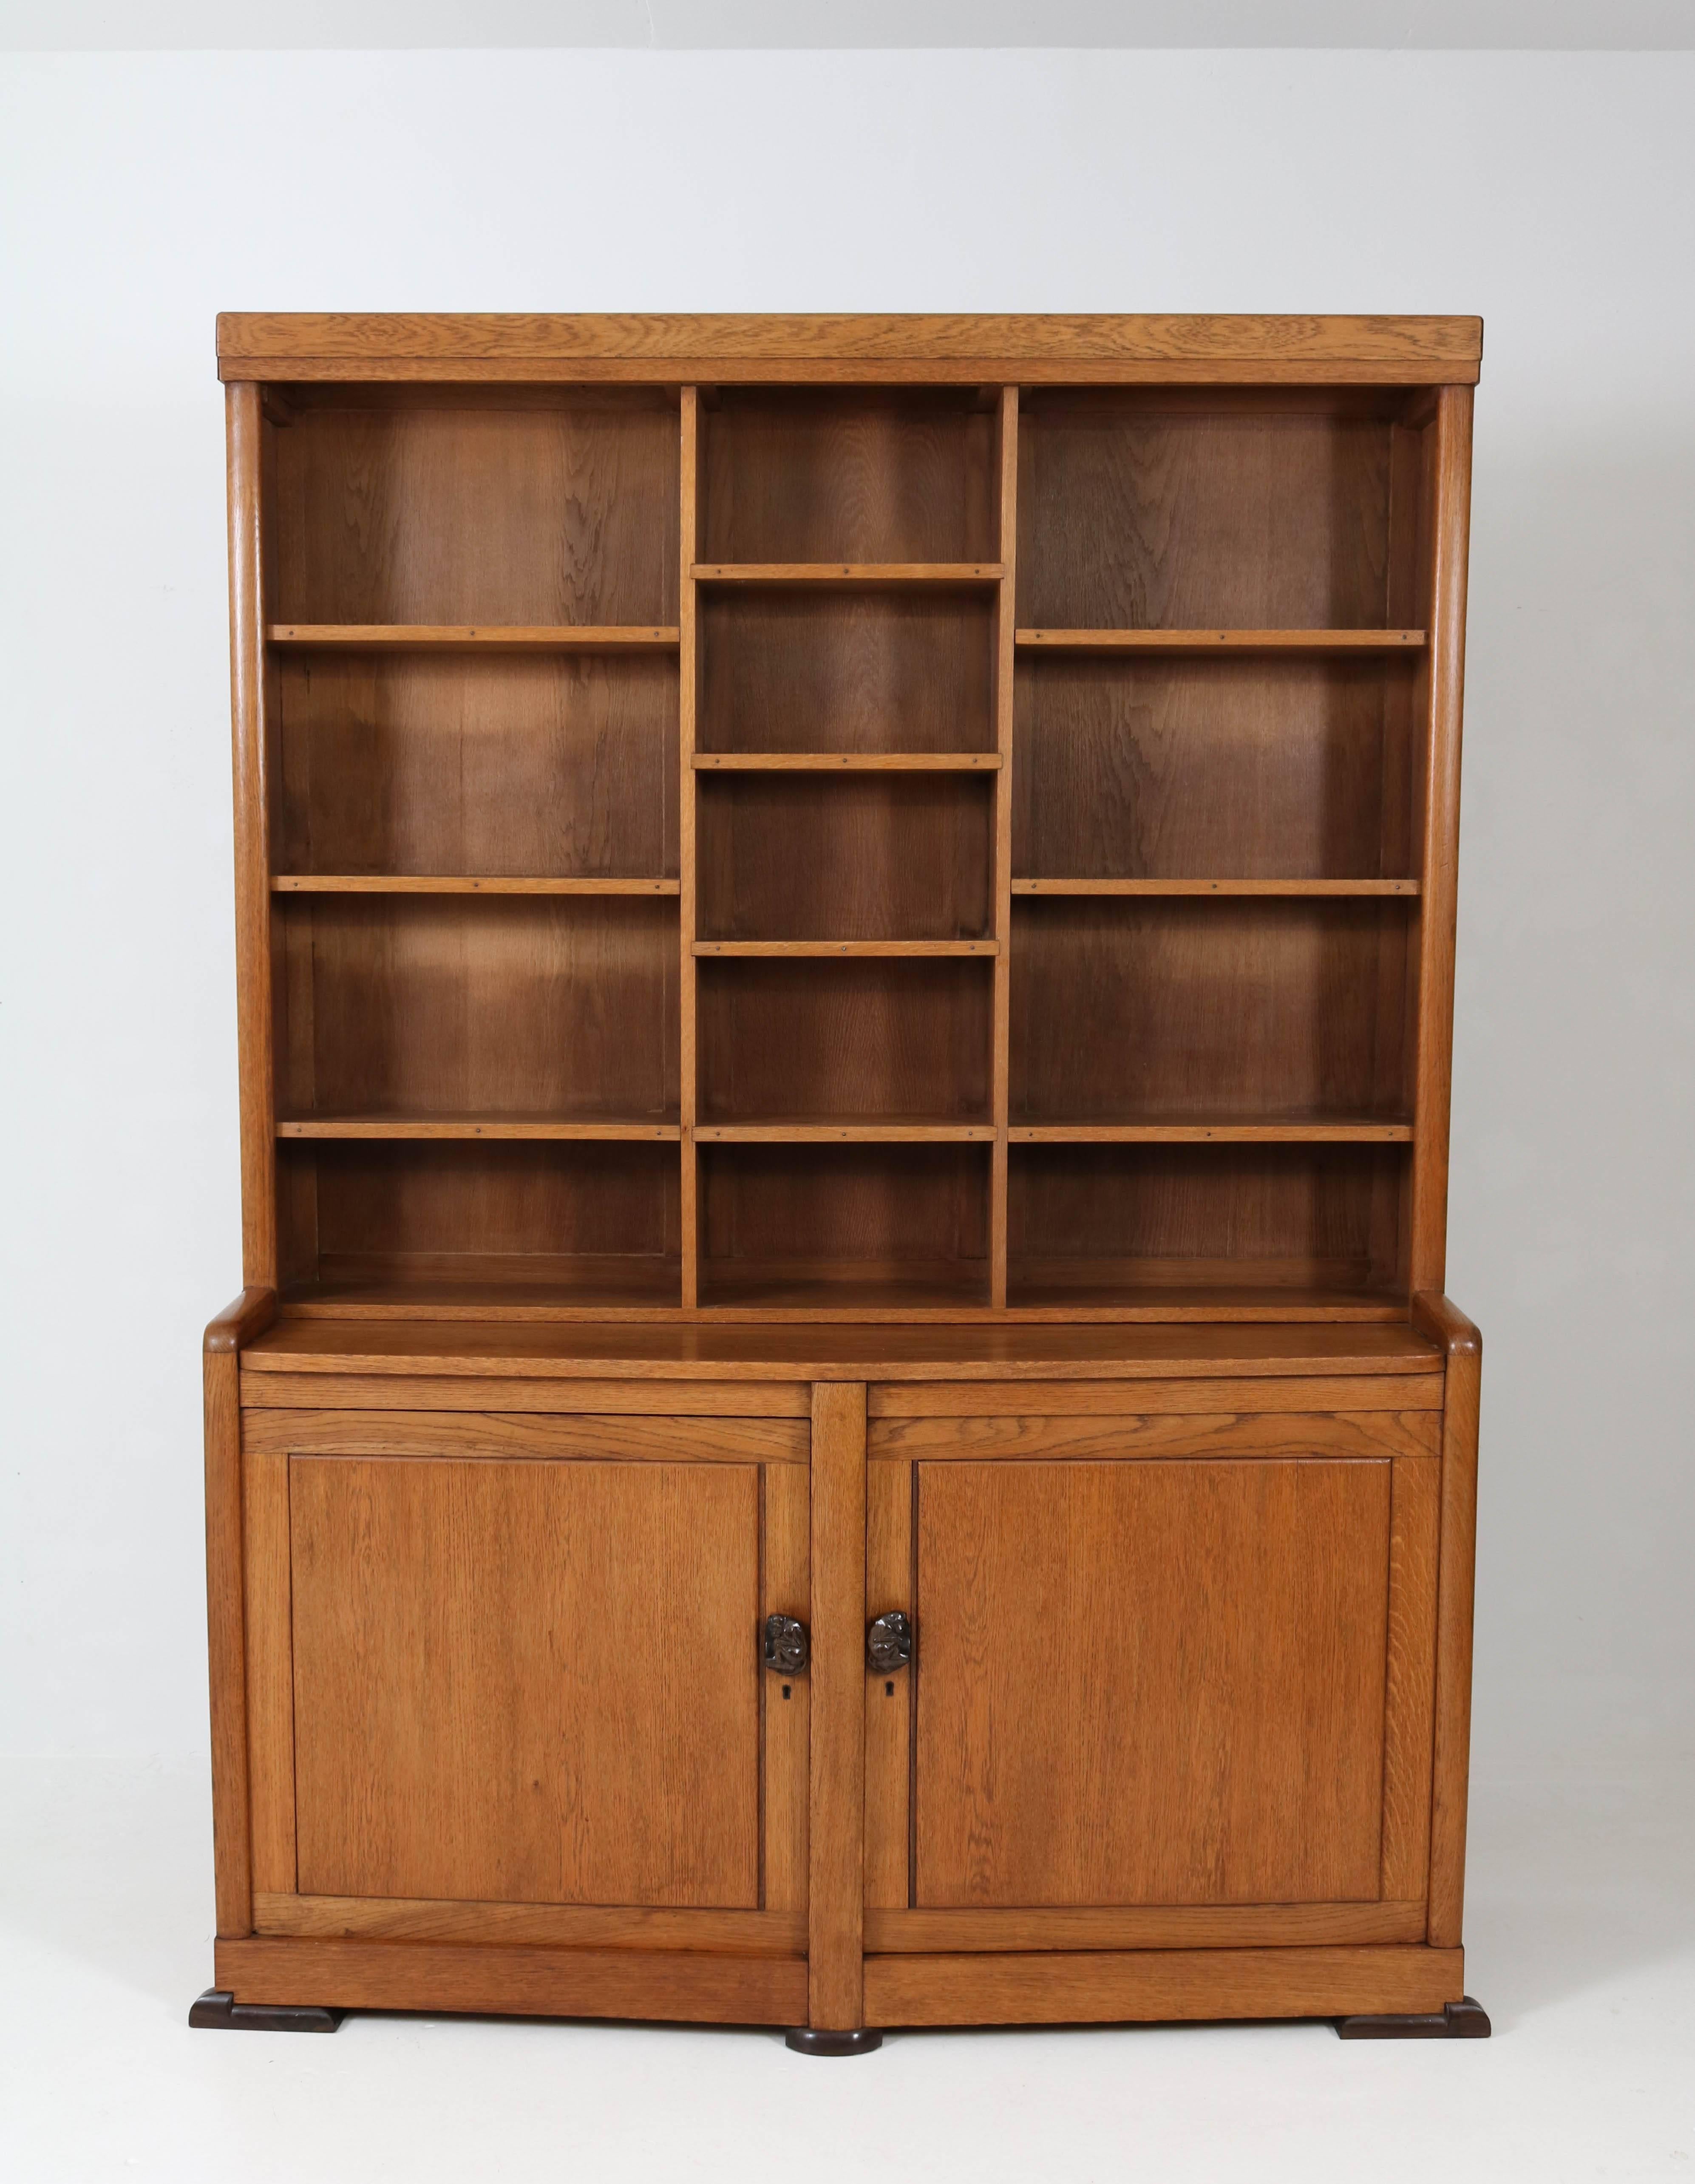 Offered by Amsterdam Modernism:
Stunning and very rare Art Deco Amsterdam school bookcase, 1920s.
Solid oak and standing on solid ebony Macassar legs.
Please note the very rare door handles, two original solid ebony Macassar carved monkeys.
In good